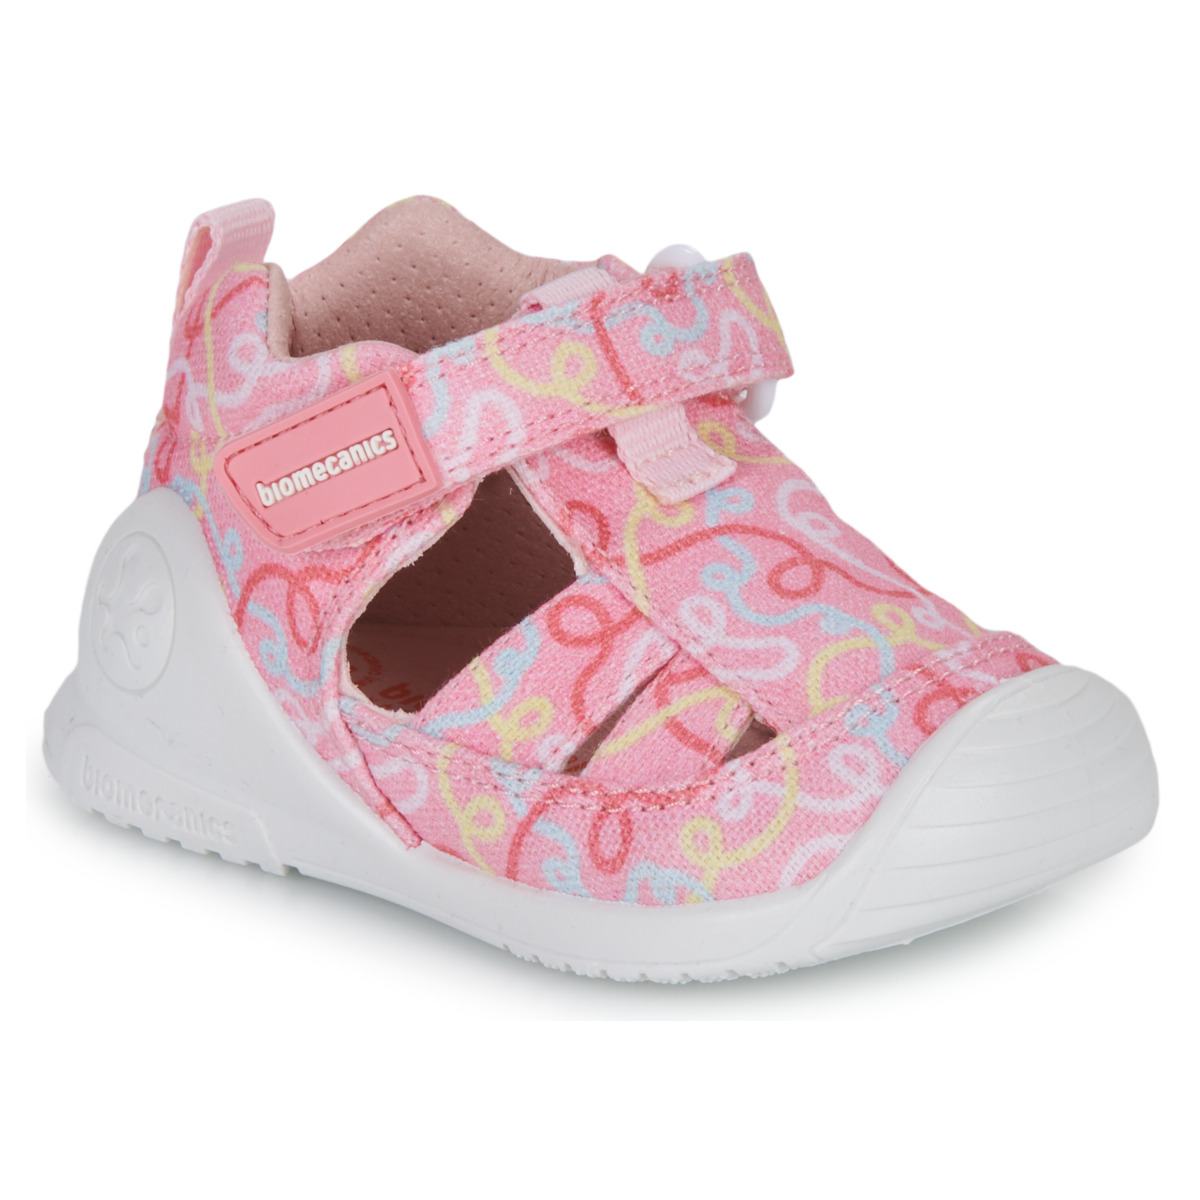 Chaussures Fille myspartoo - get inspired 232180 Rose